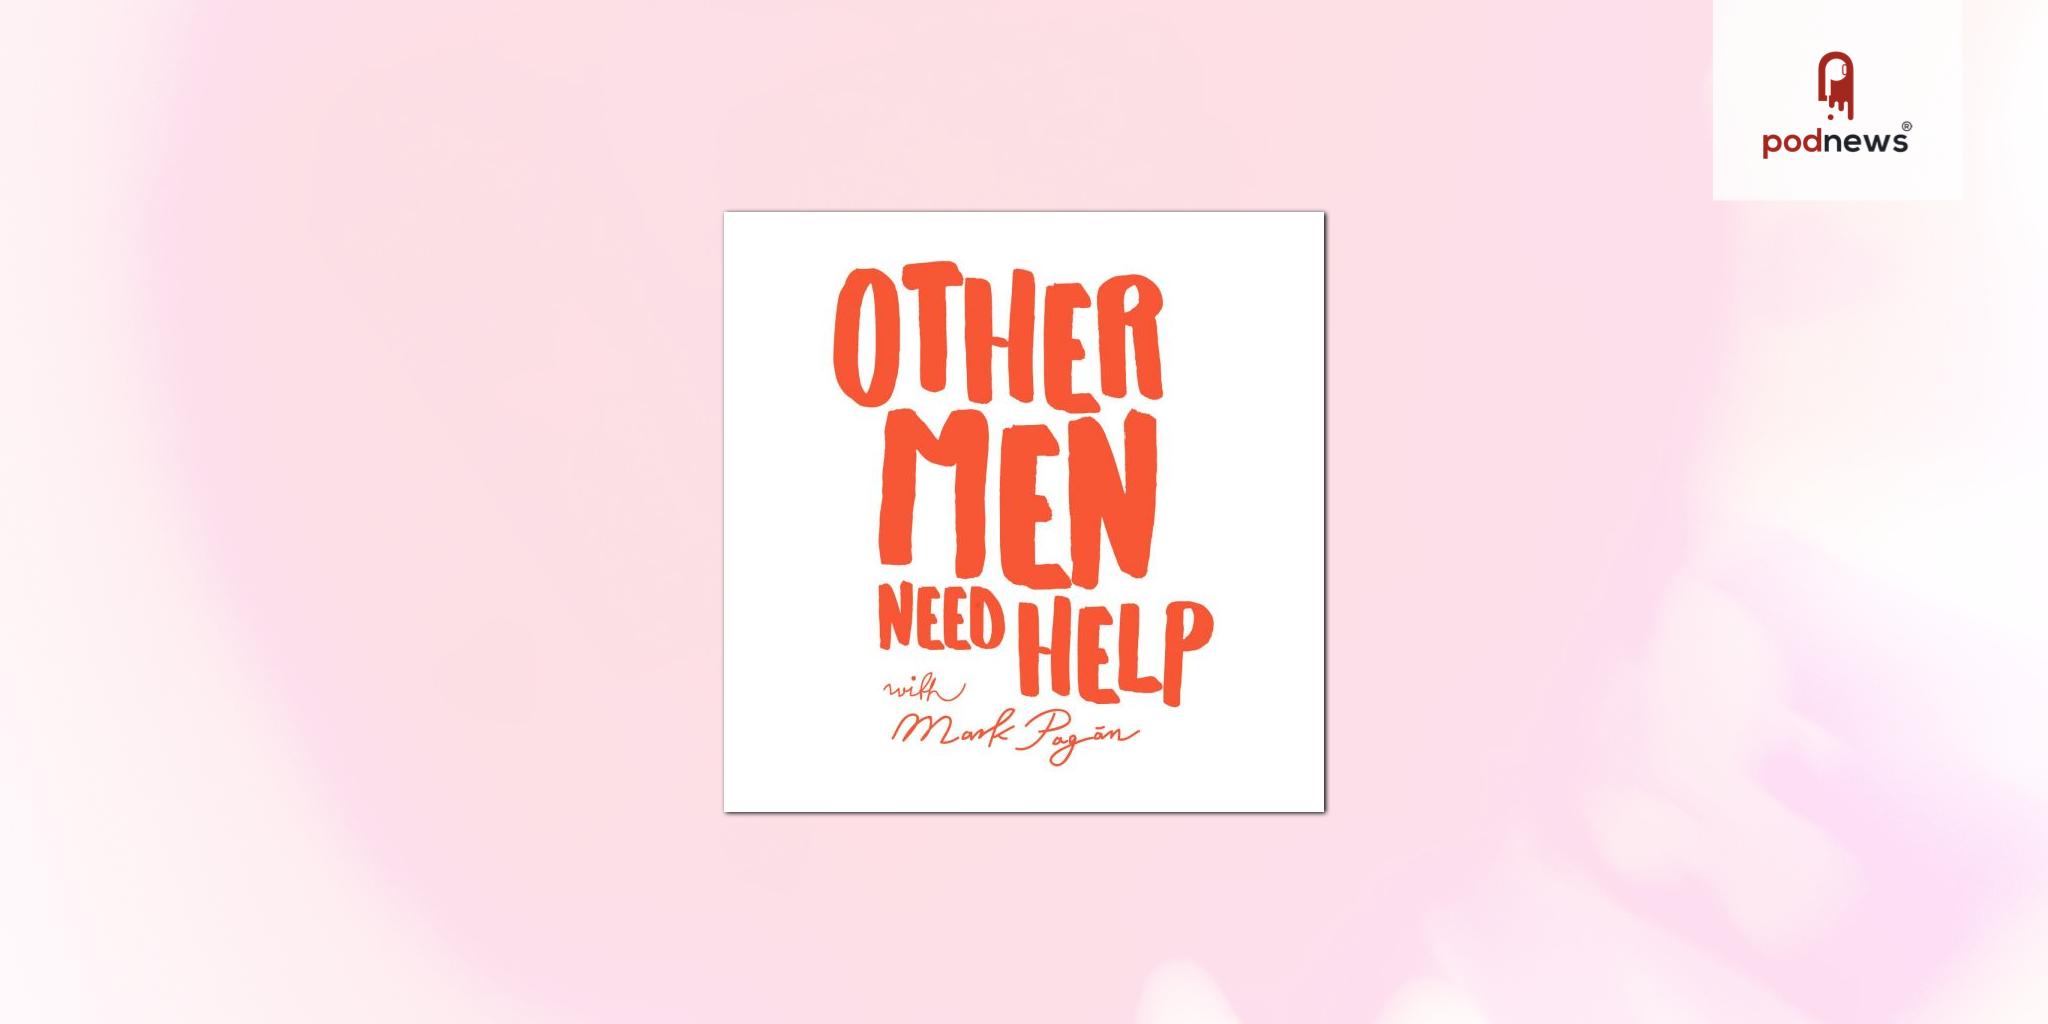 Other Men Need Help Podcast Launches Fourth Season